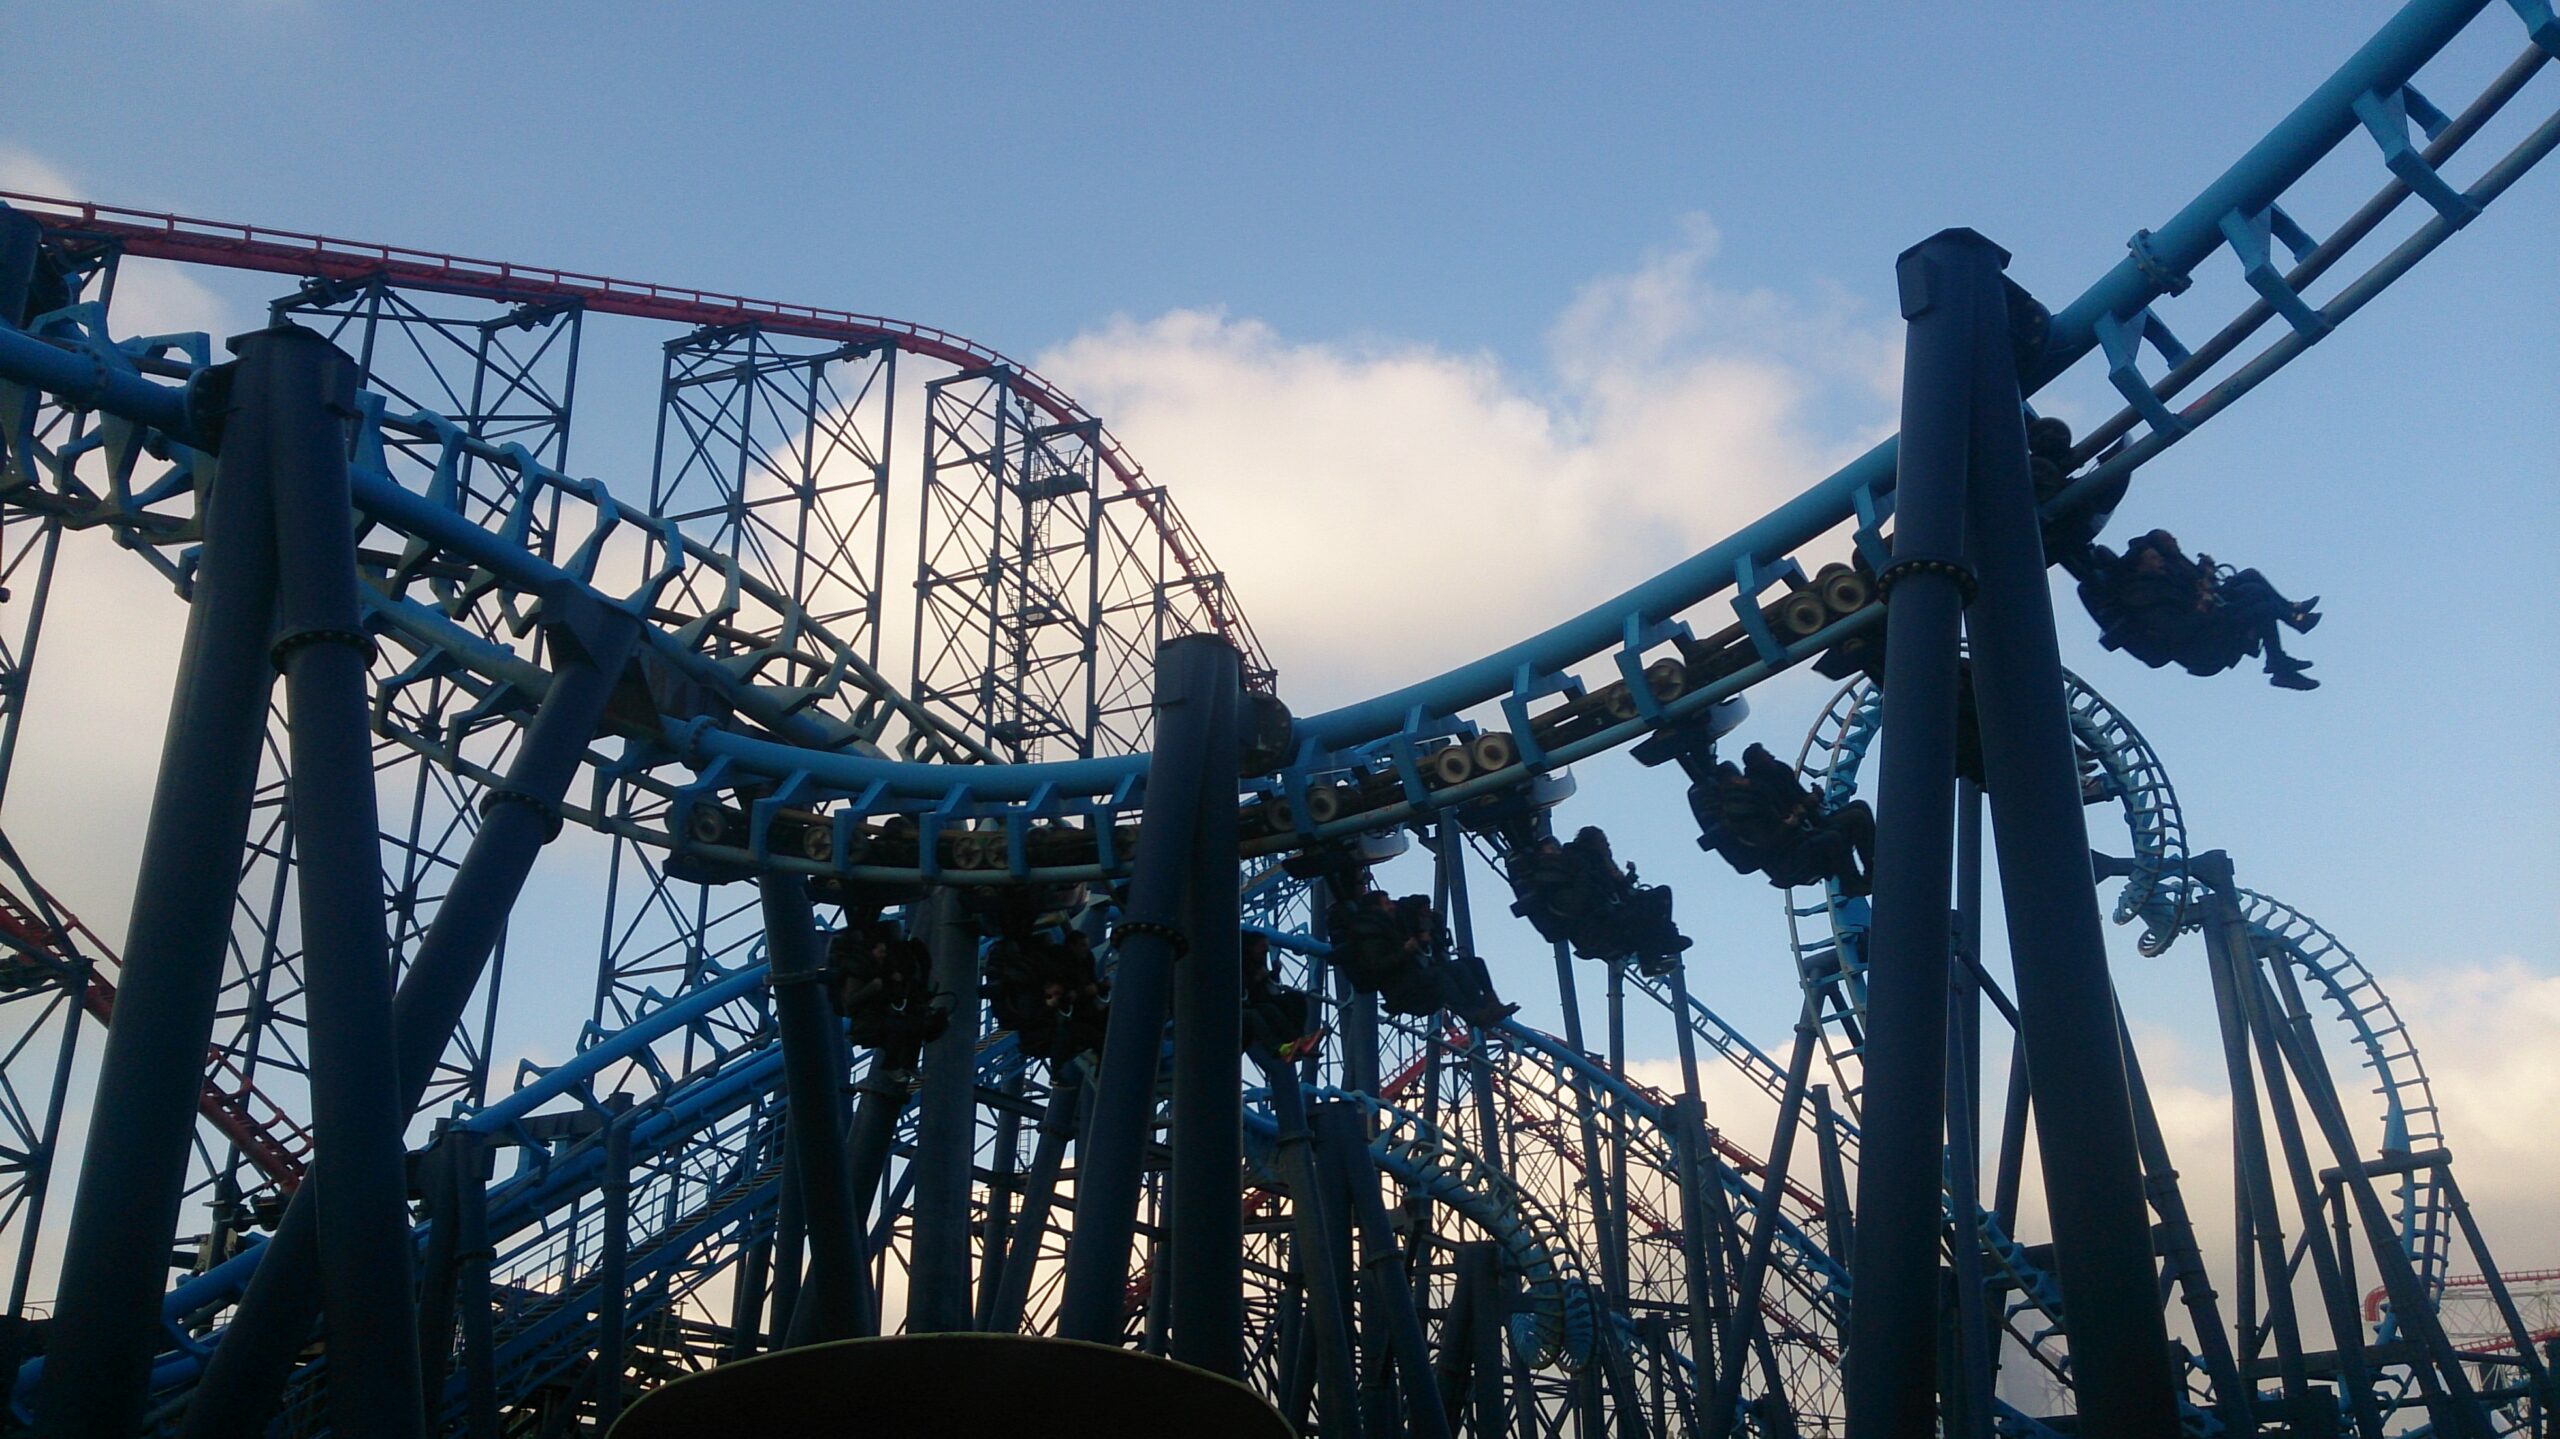 Image of Infusion at Blackpool Pleasure Beach with train on track, and Big One in the background